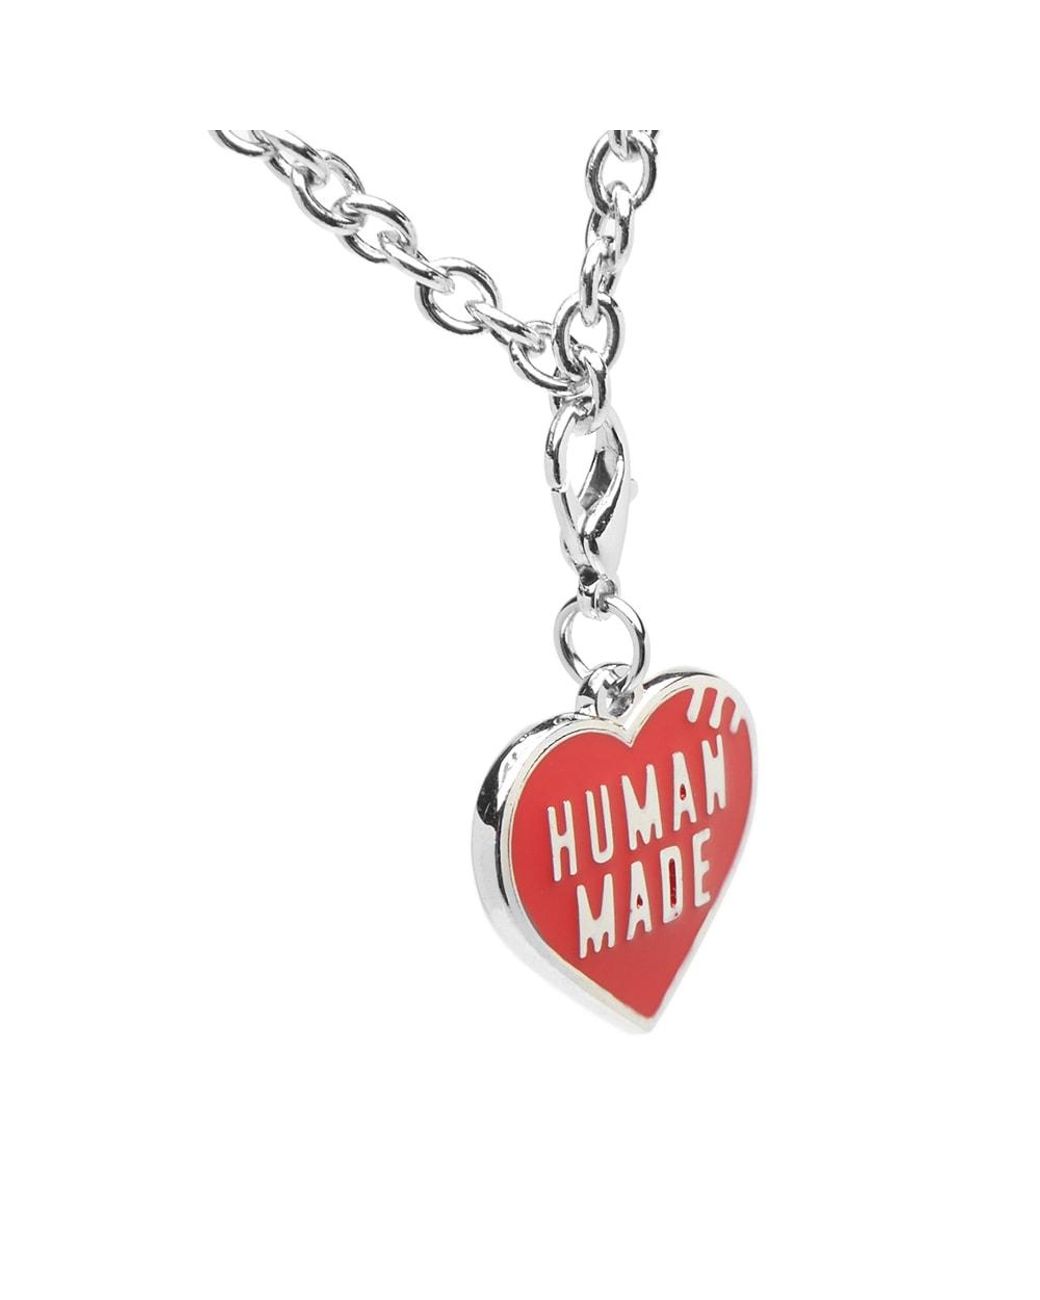 HUMAN MADE HEART SILVER NECKLACE - ネックレス